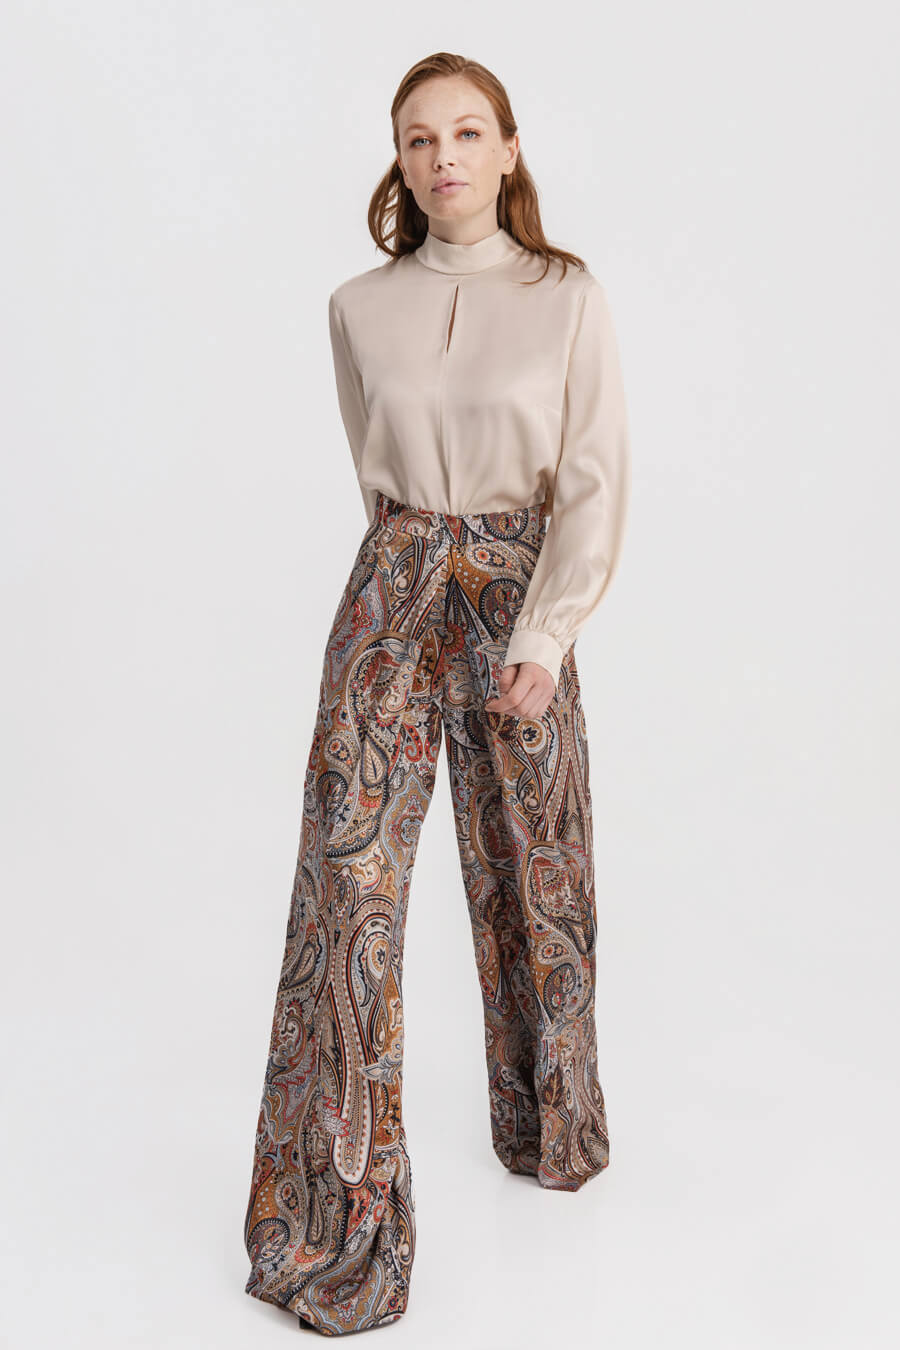 Paisley pants with front slits for working women fashion